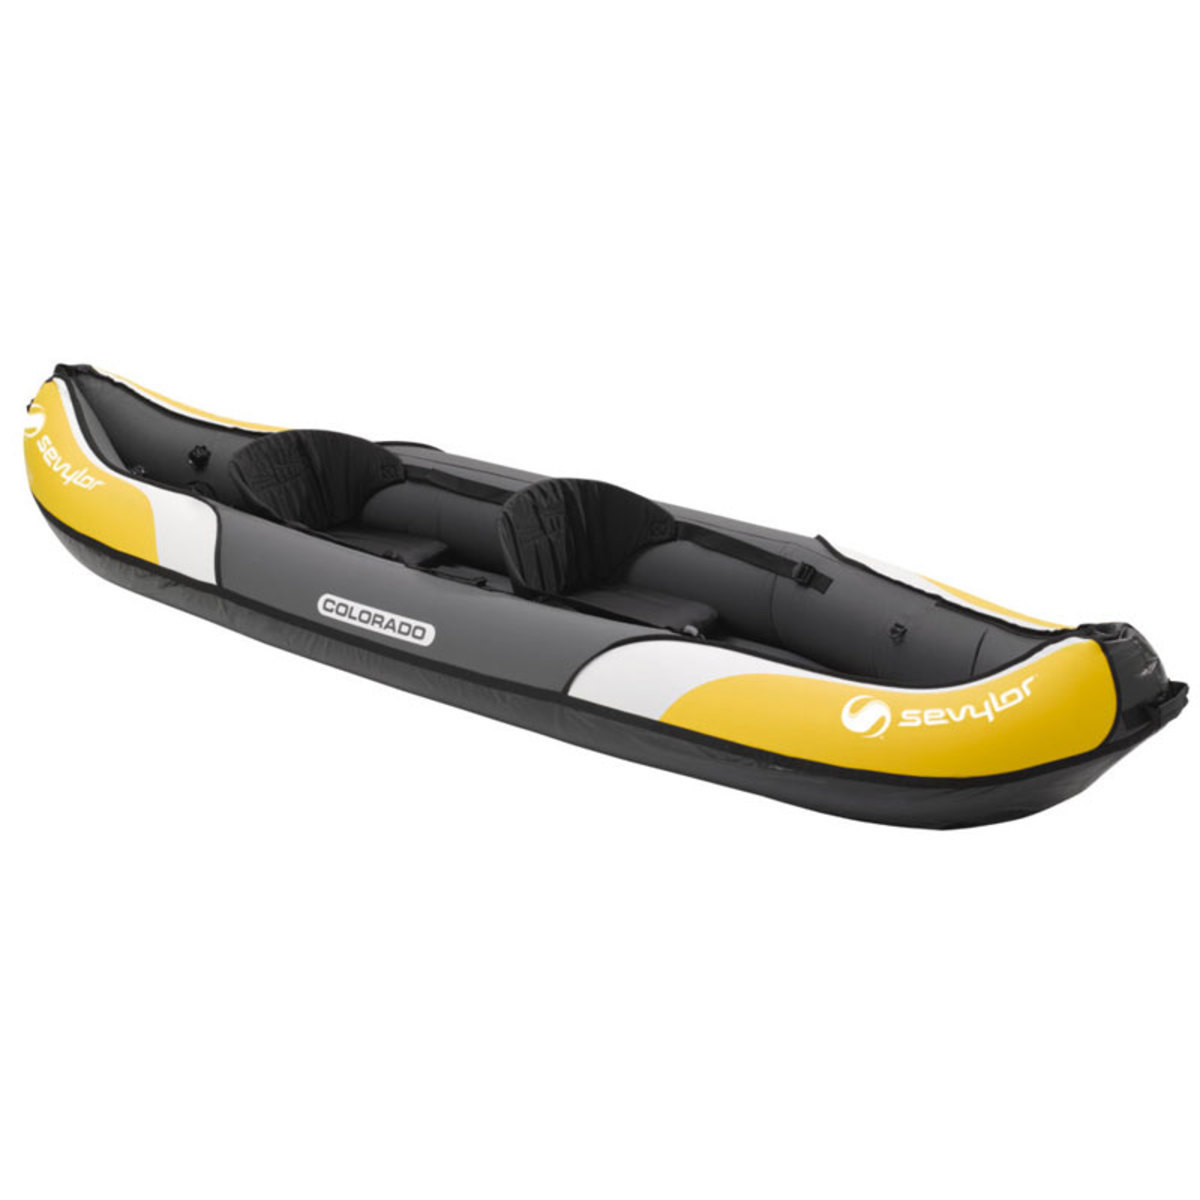 Sevylor Colorado Kit 11ft (333cm) 2 Person Inflatable Kayak with Paddle